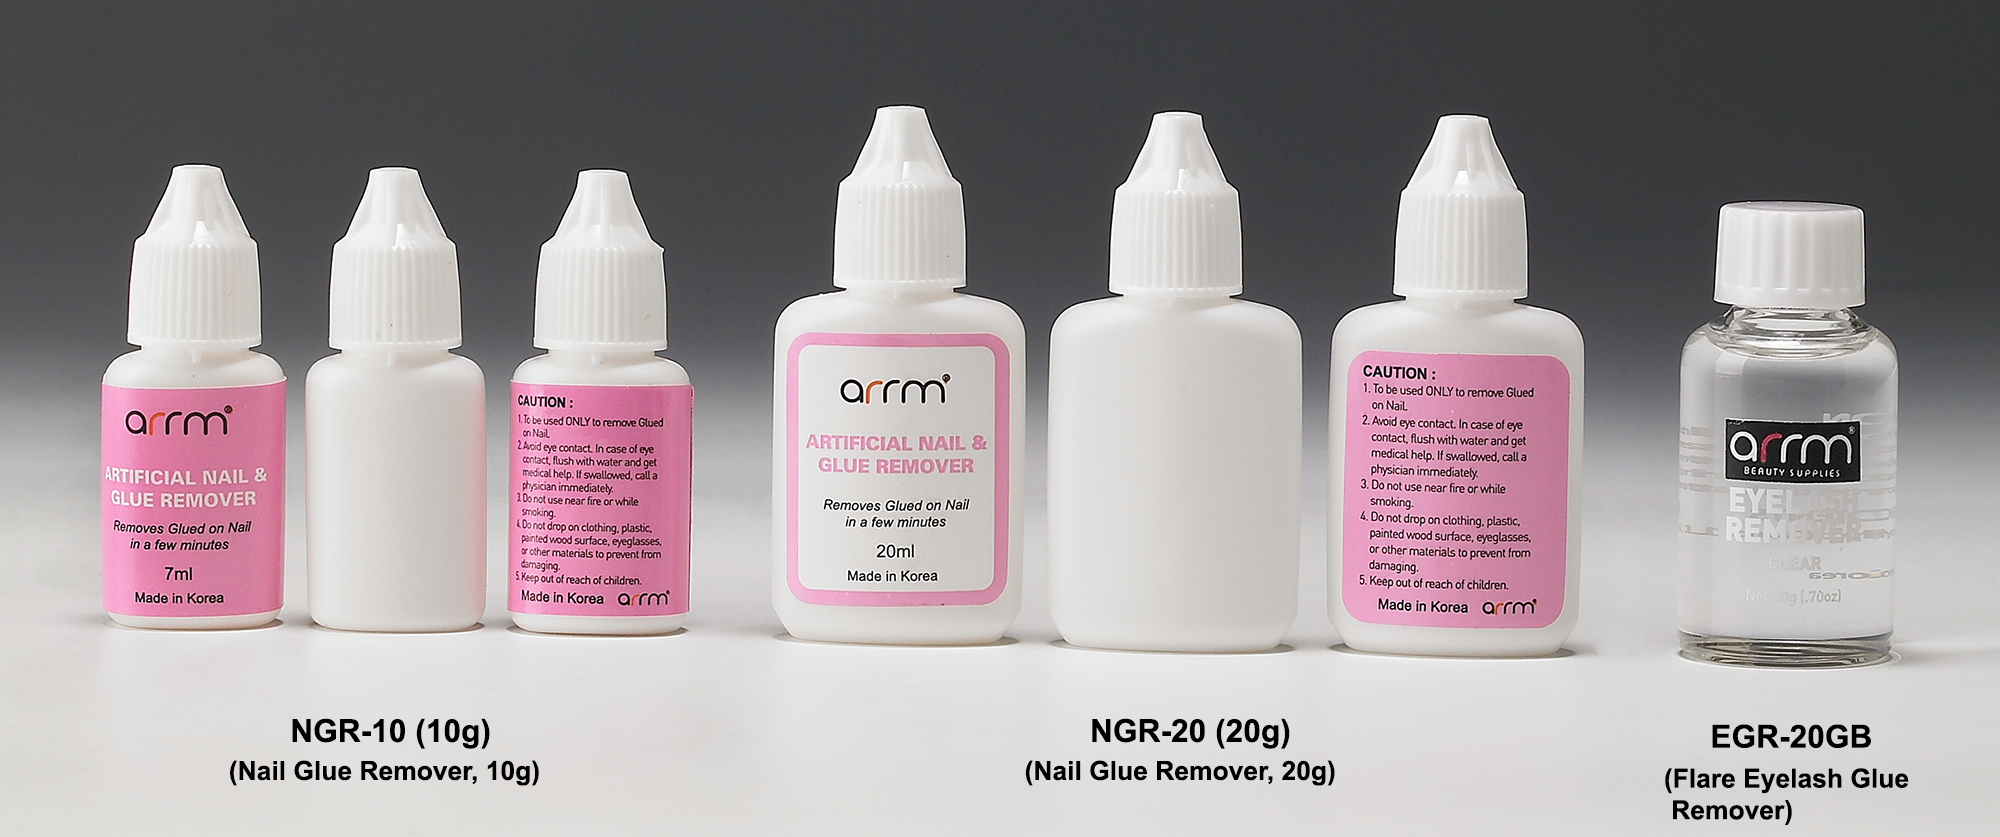 ARRM  Nail art, Pedicure collection, Nail gel, polish system